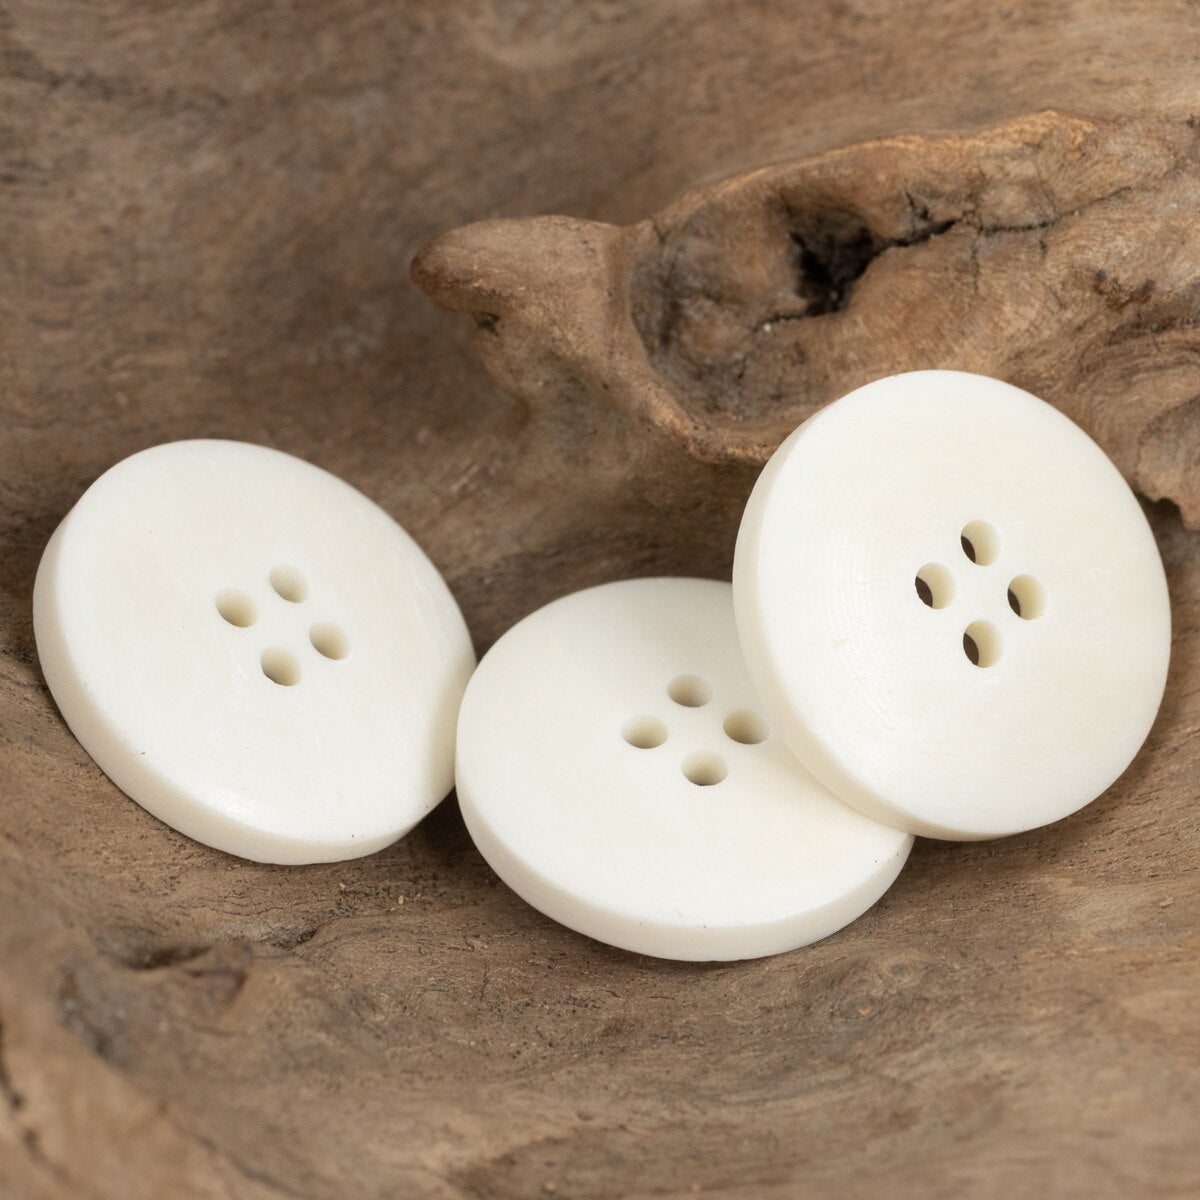 6pcs Frame White Bone Buttons Natural Material Heavy Classic White Buttons